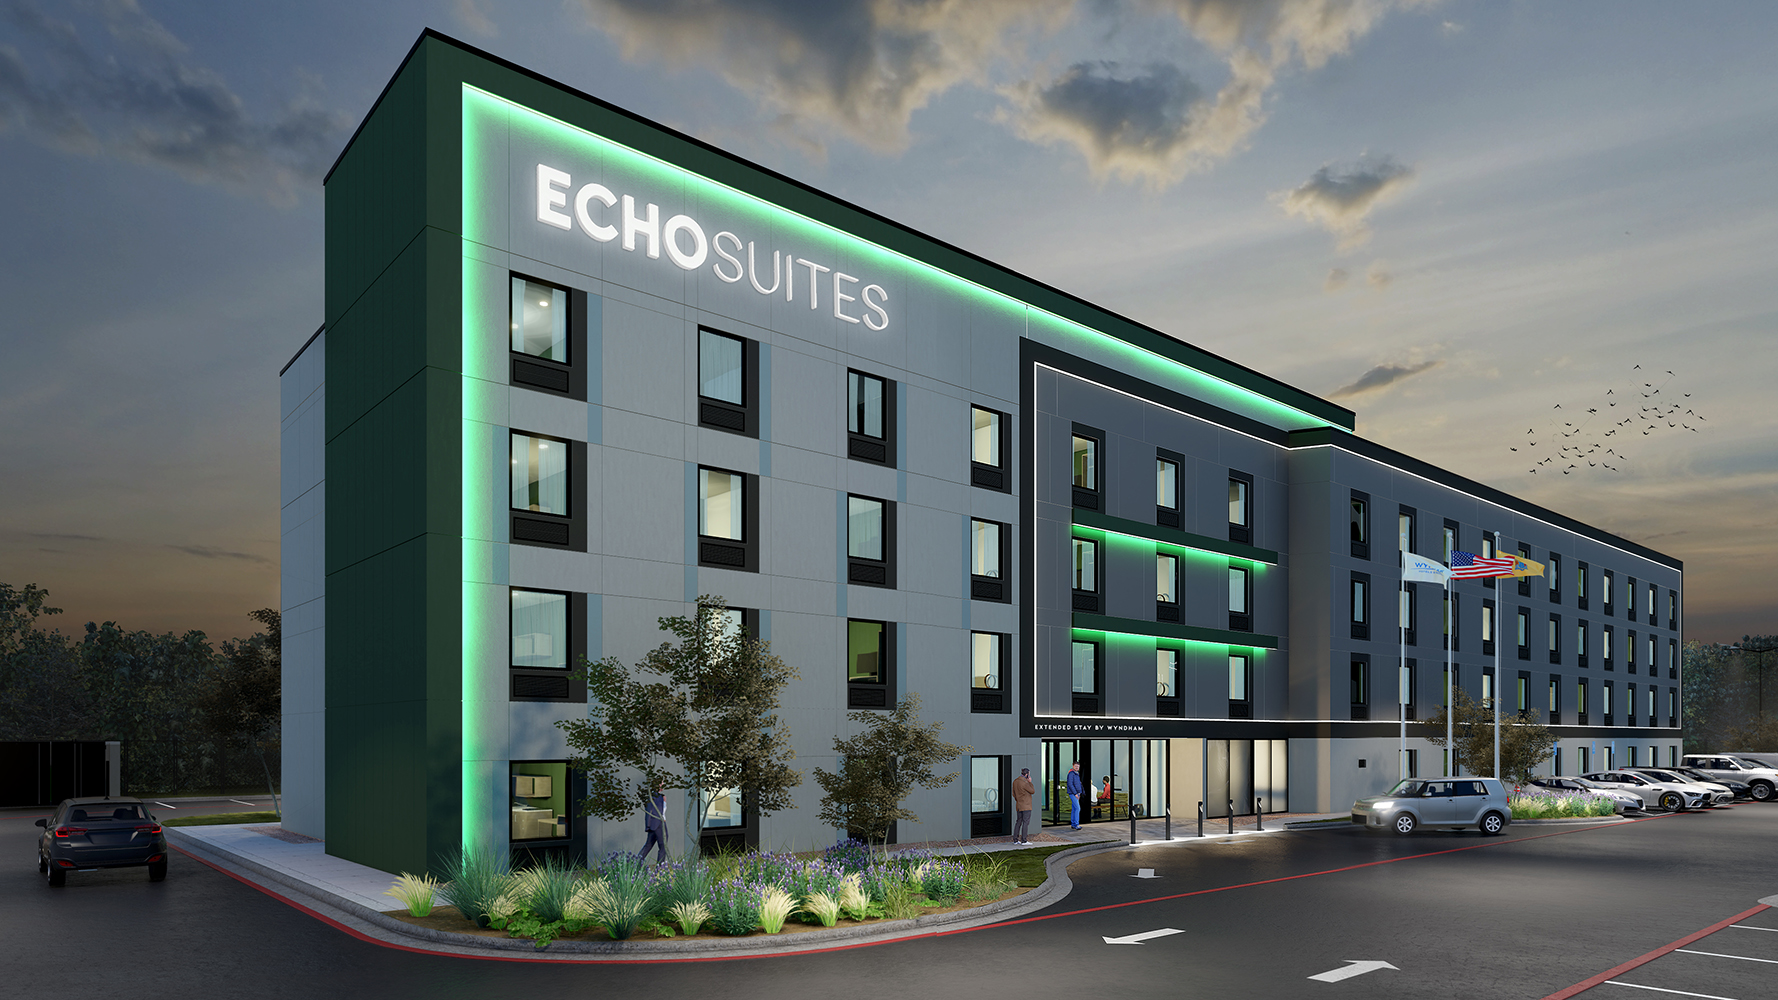 ECHO Suites Extended Stay by Wyndham exterior